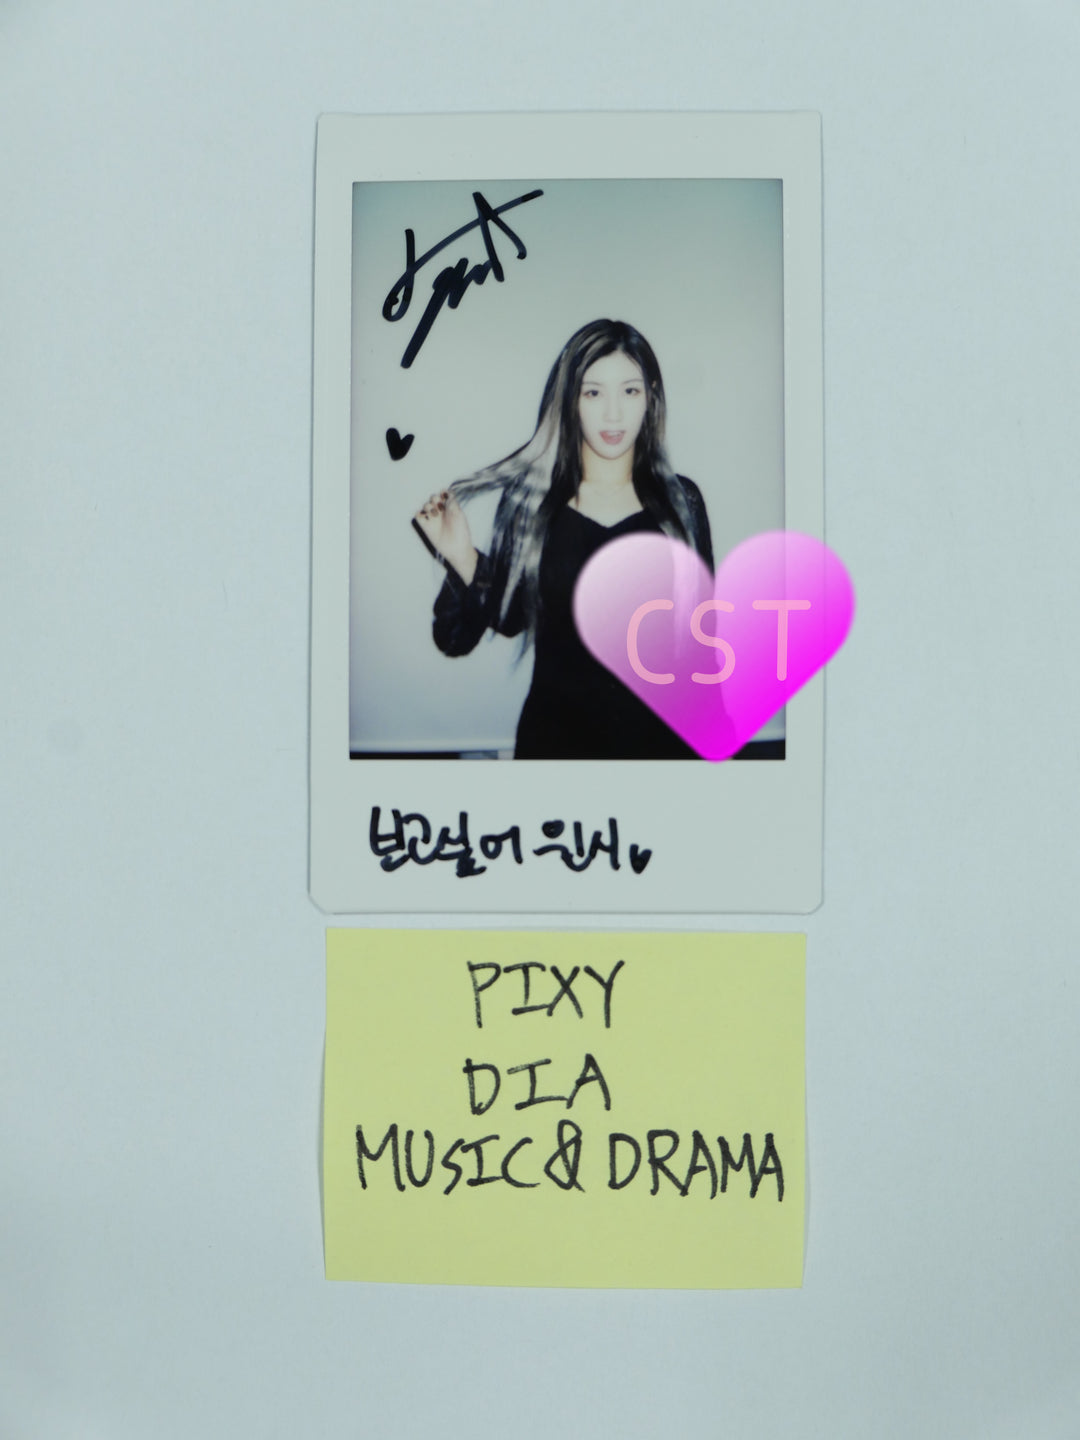 PIXY - Hand Autographed(Signed) Polaroid